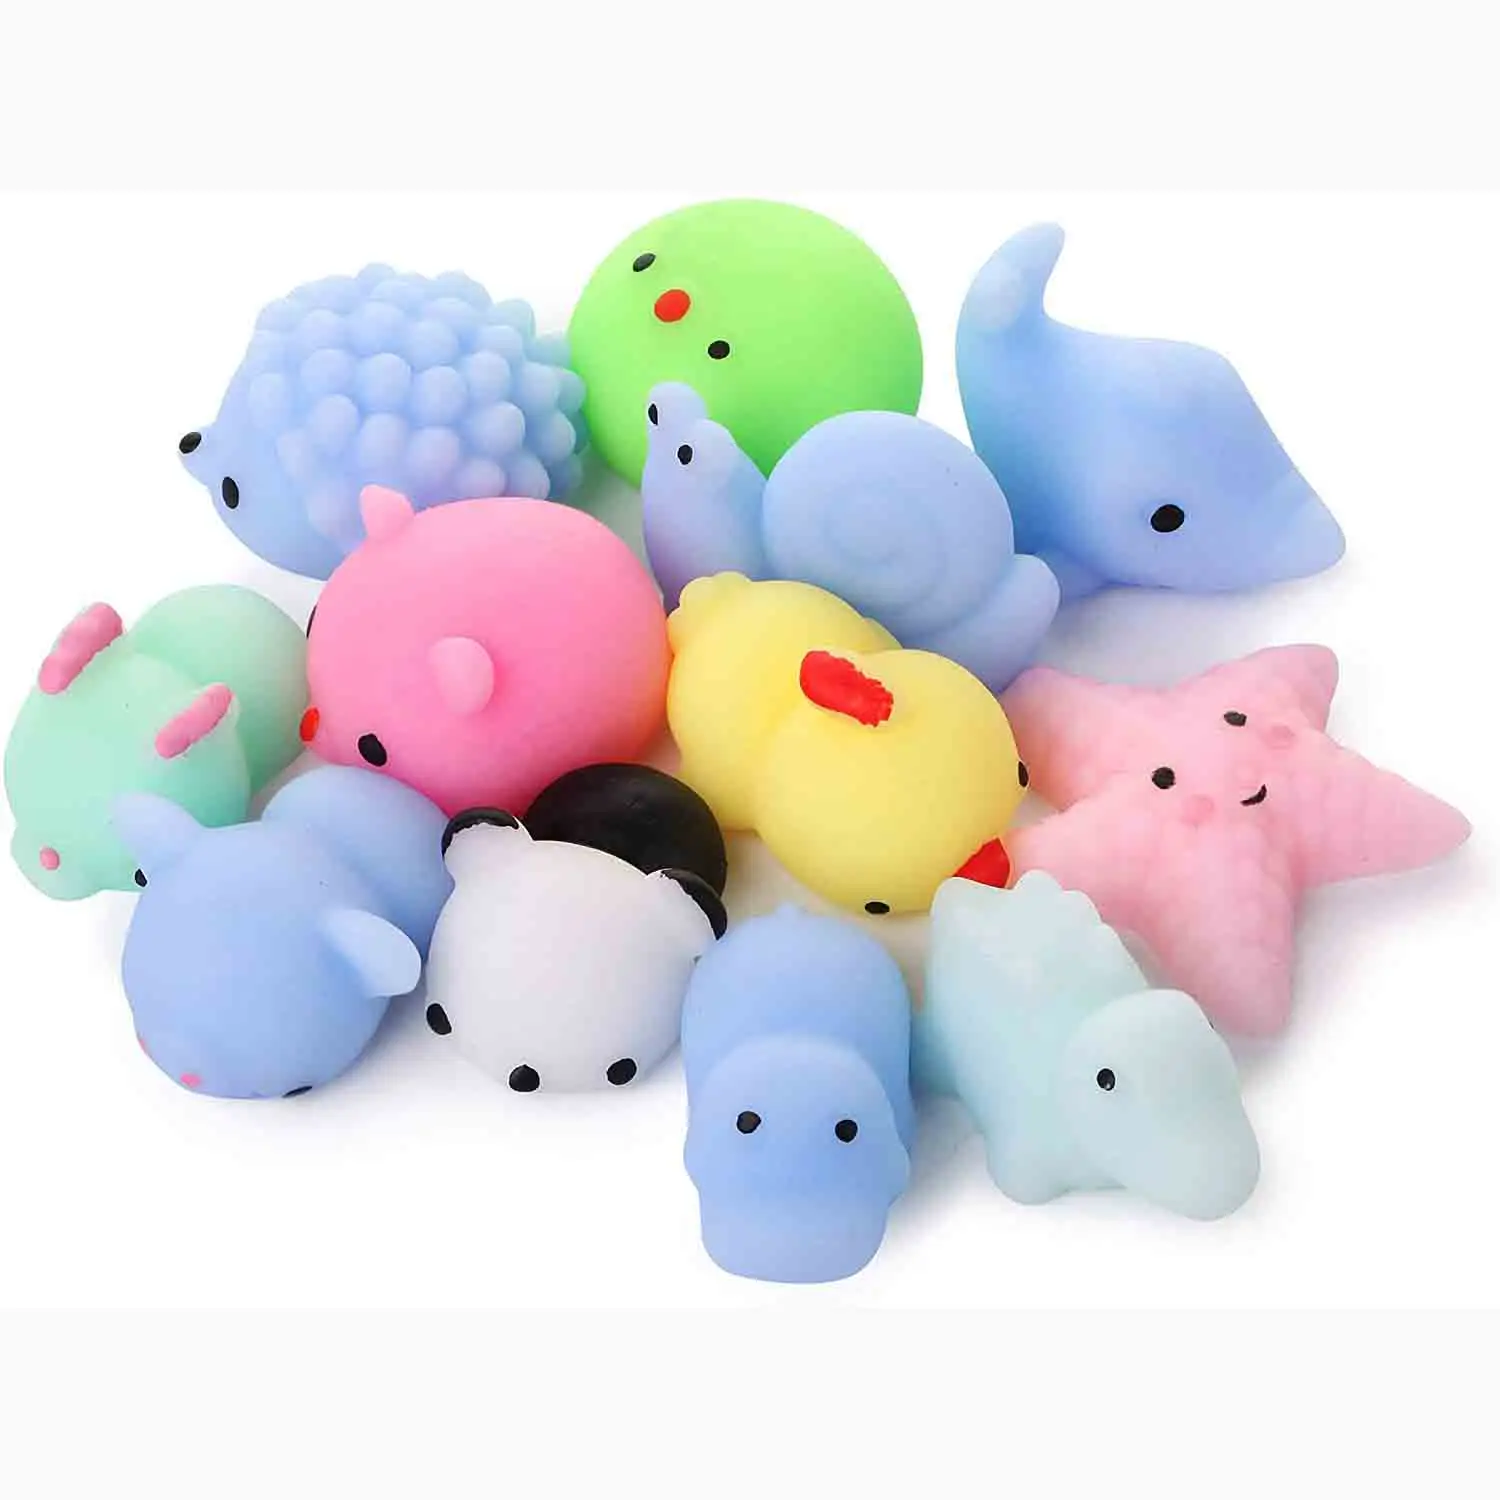 Small squishy toys